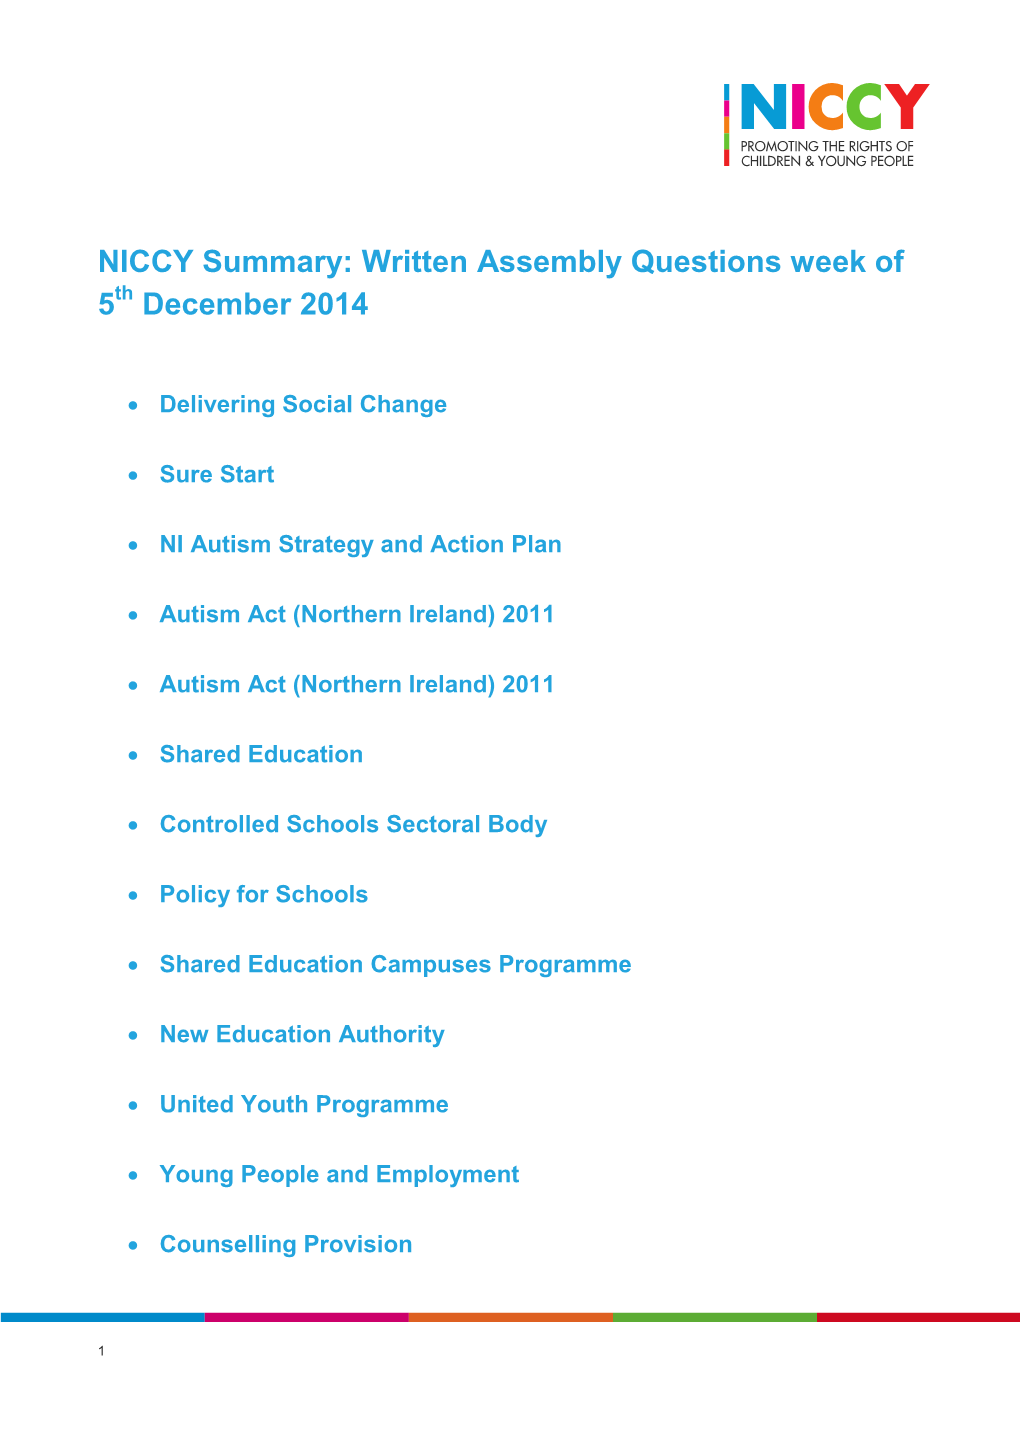 NICCY Summary: Written Assembly Questions Week of 5 December